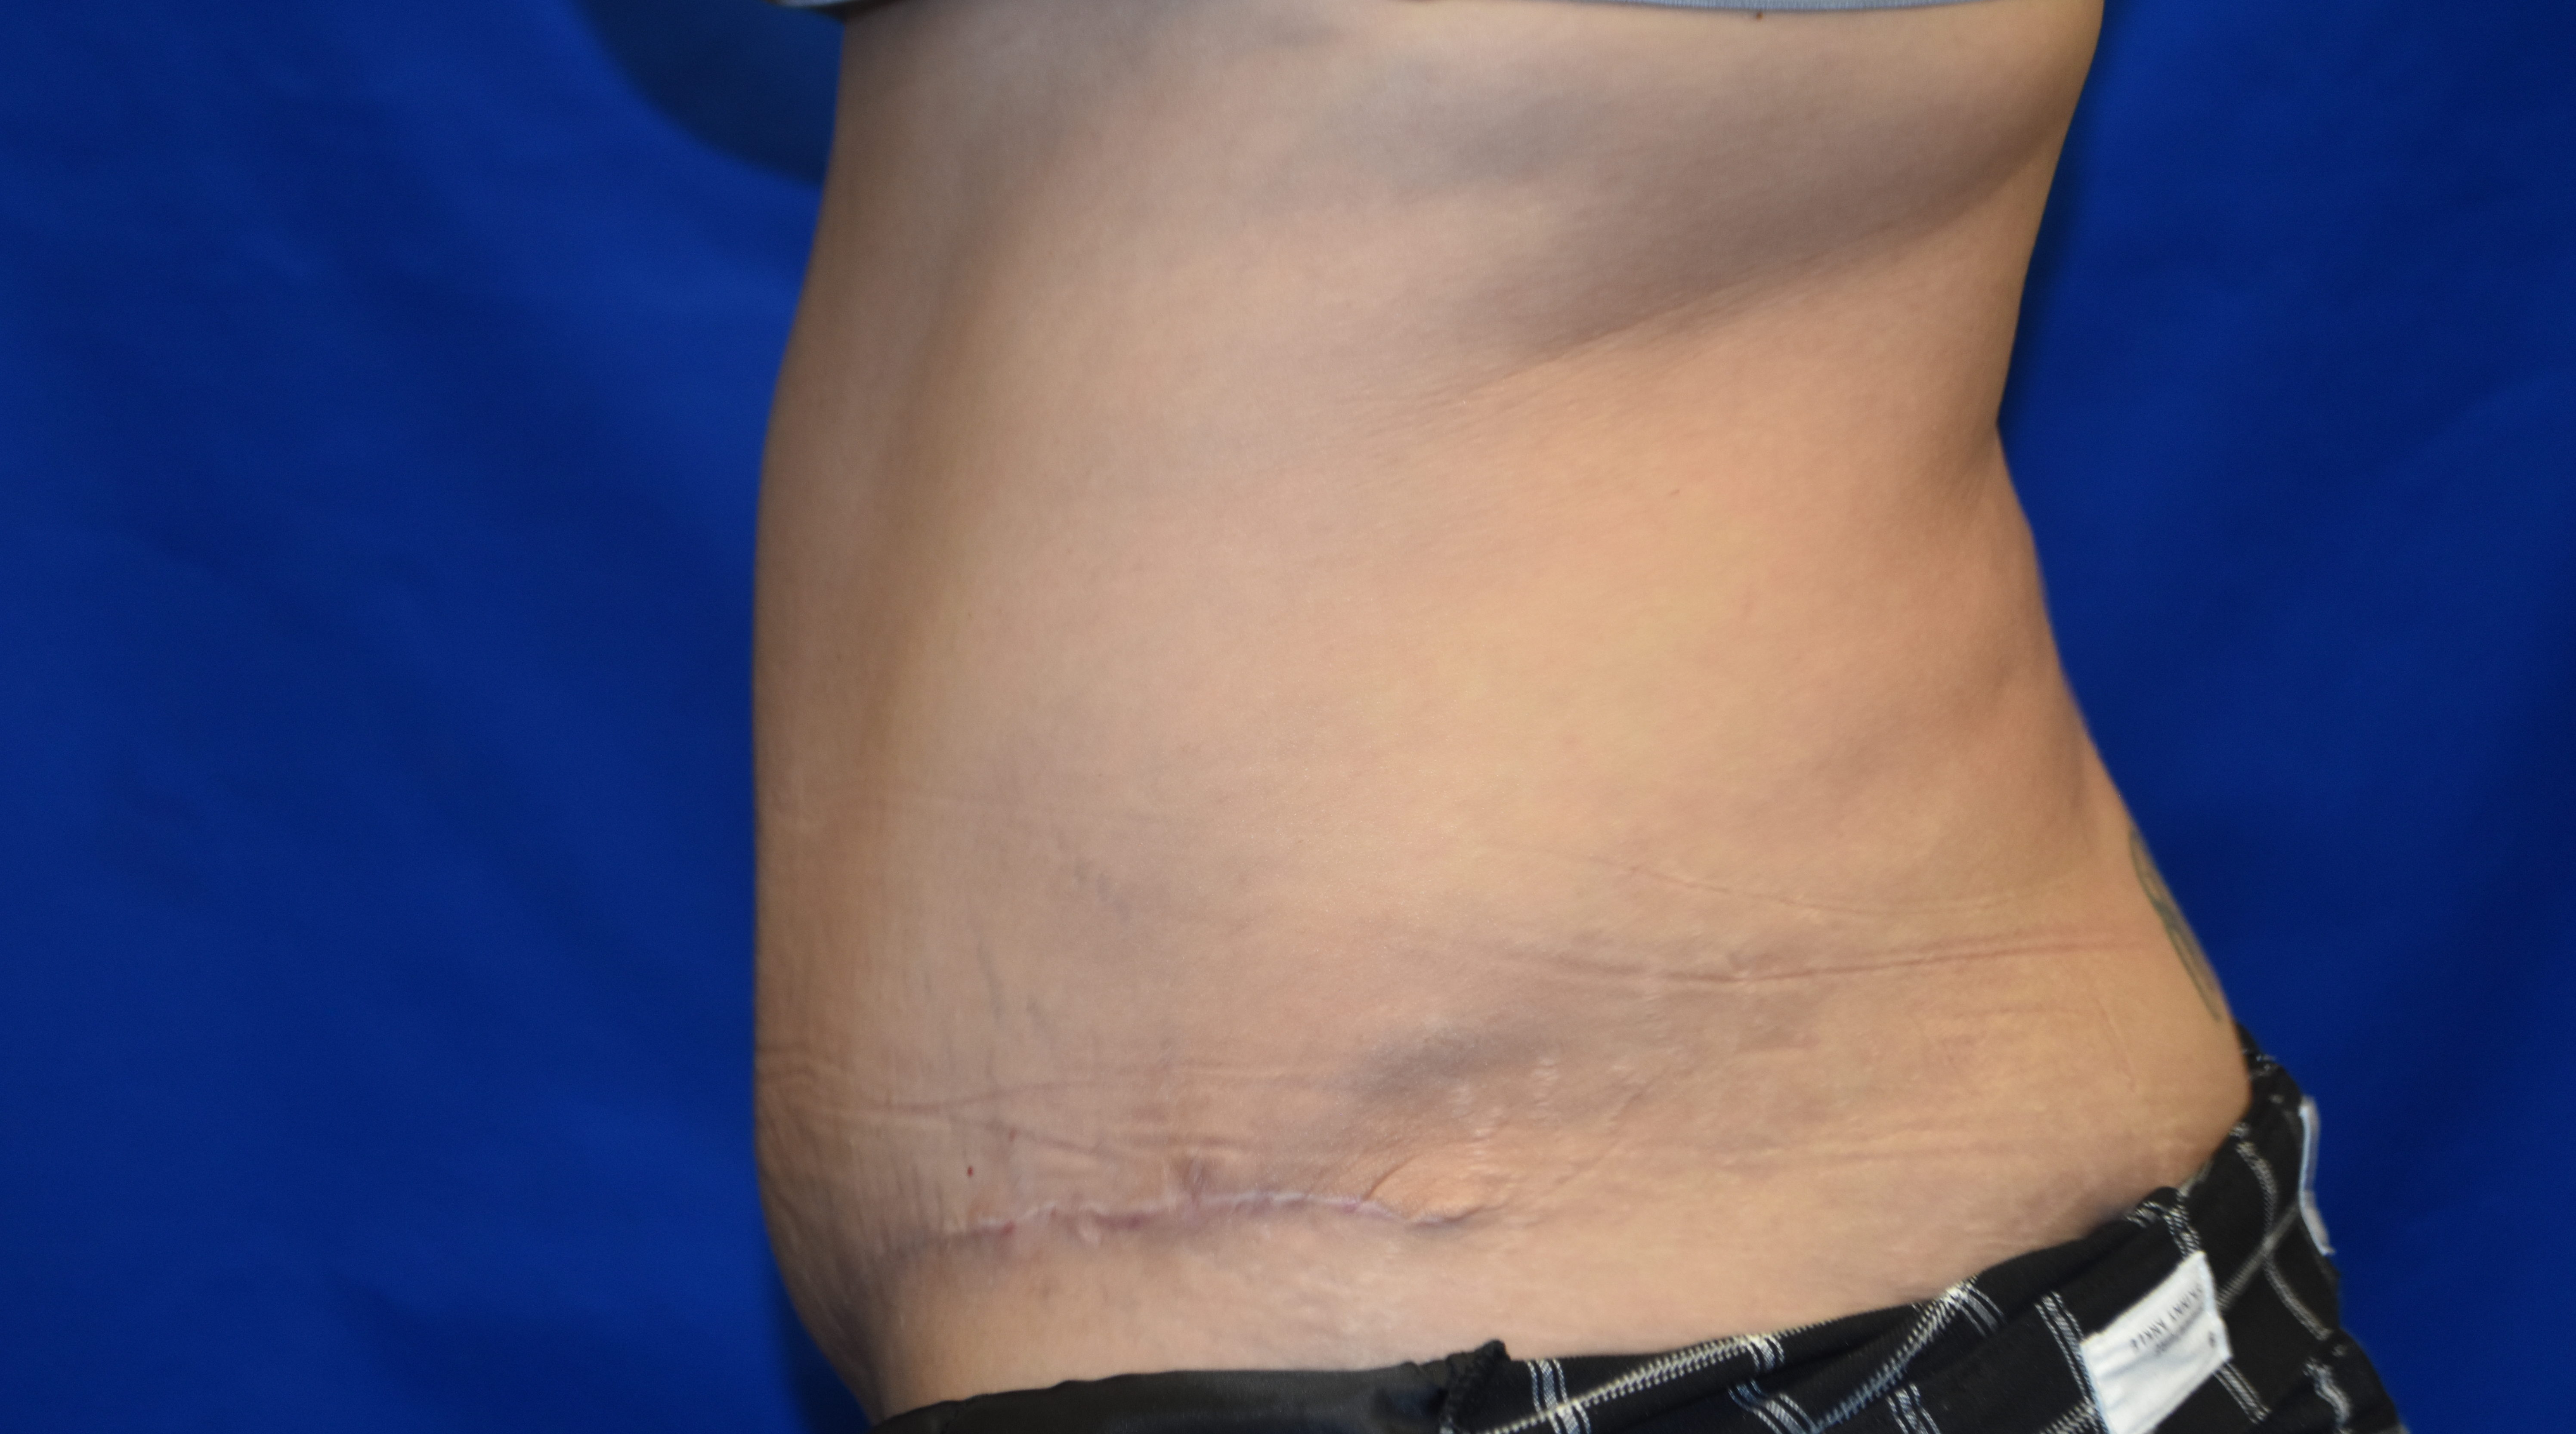 After-abdominoplasty side